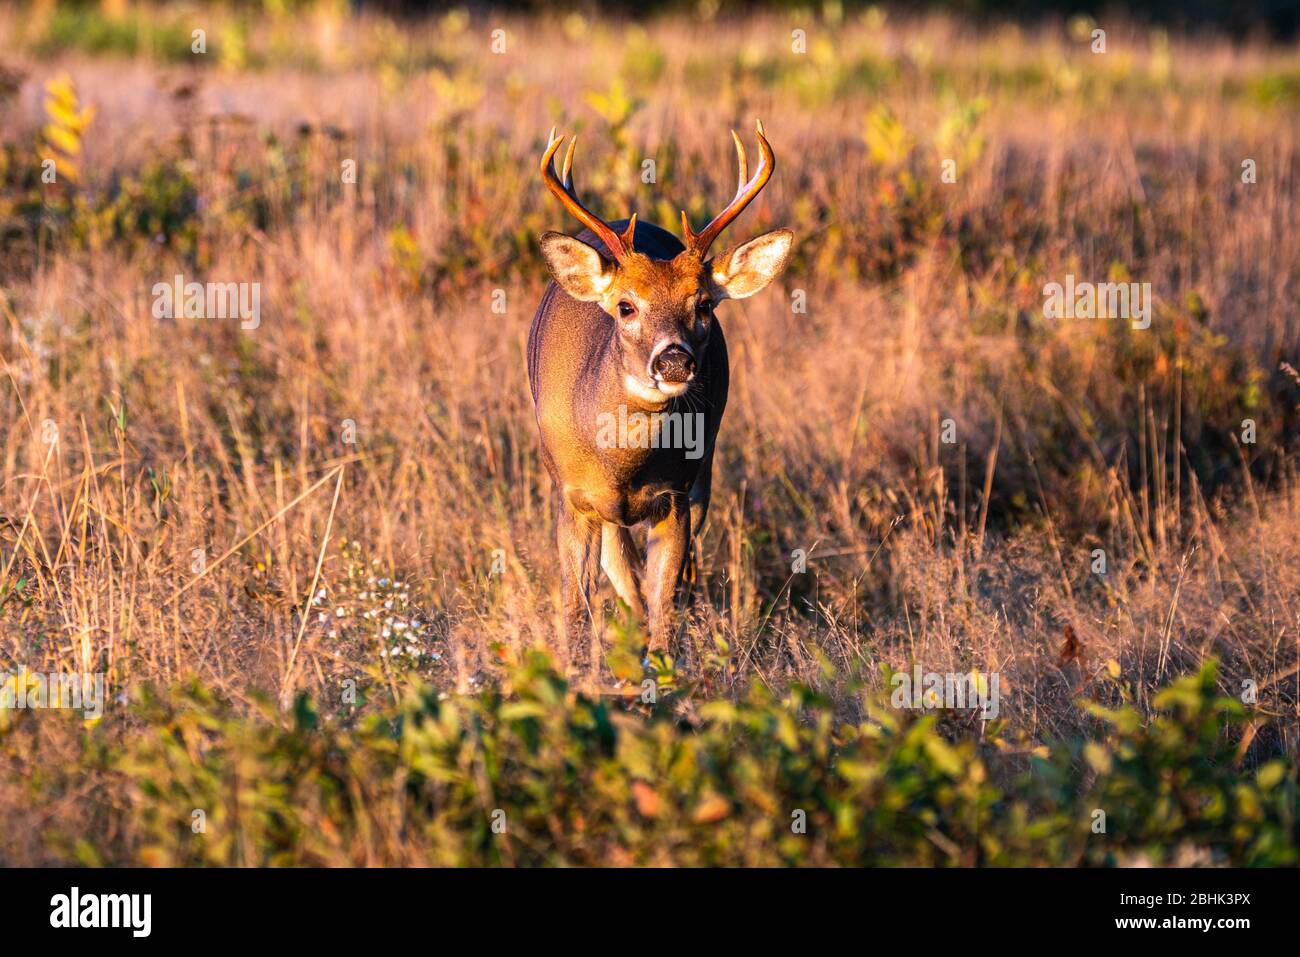 A male white-tailed deer with antlers walks toward the camera in a field Stock Photo